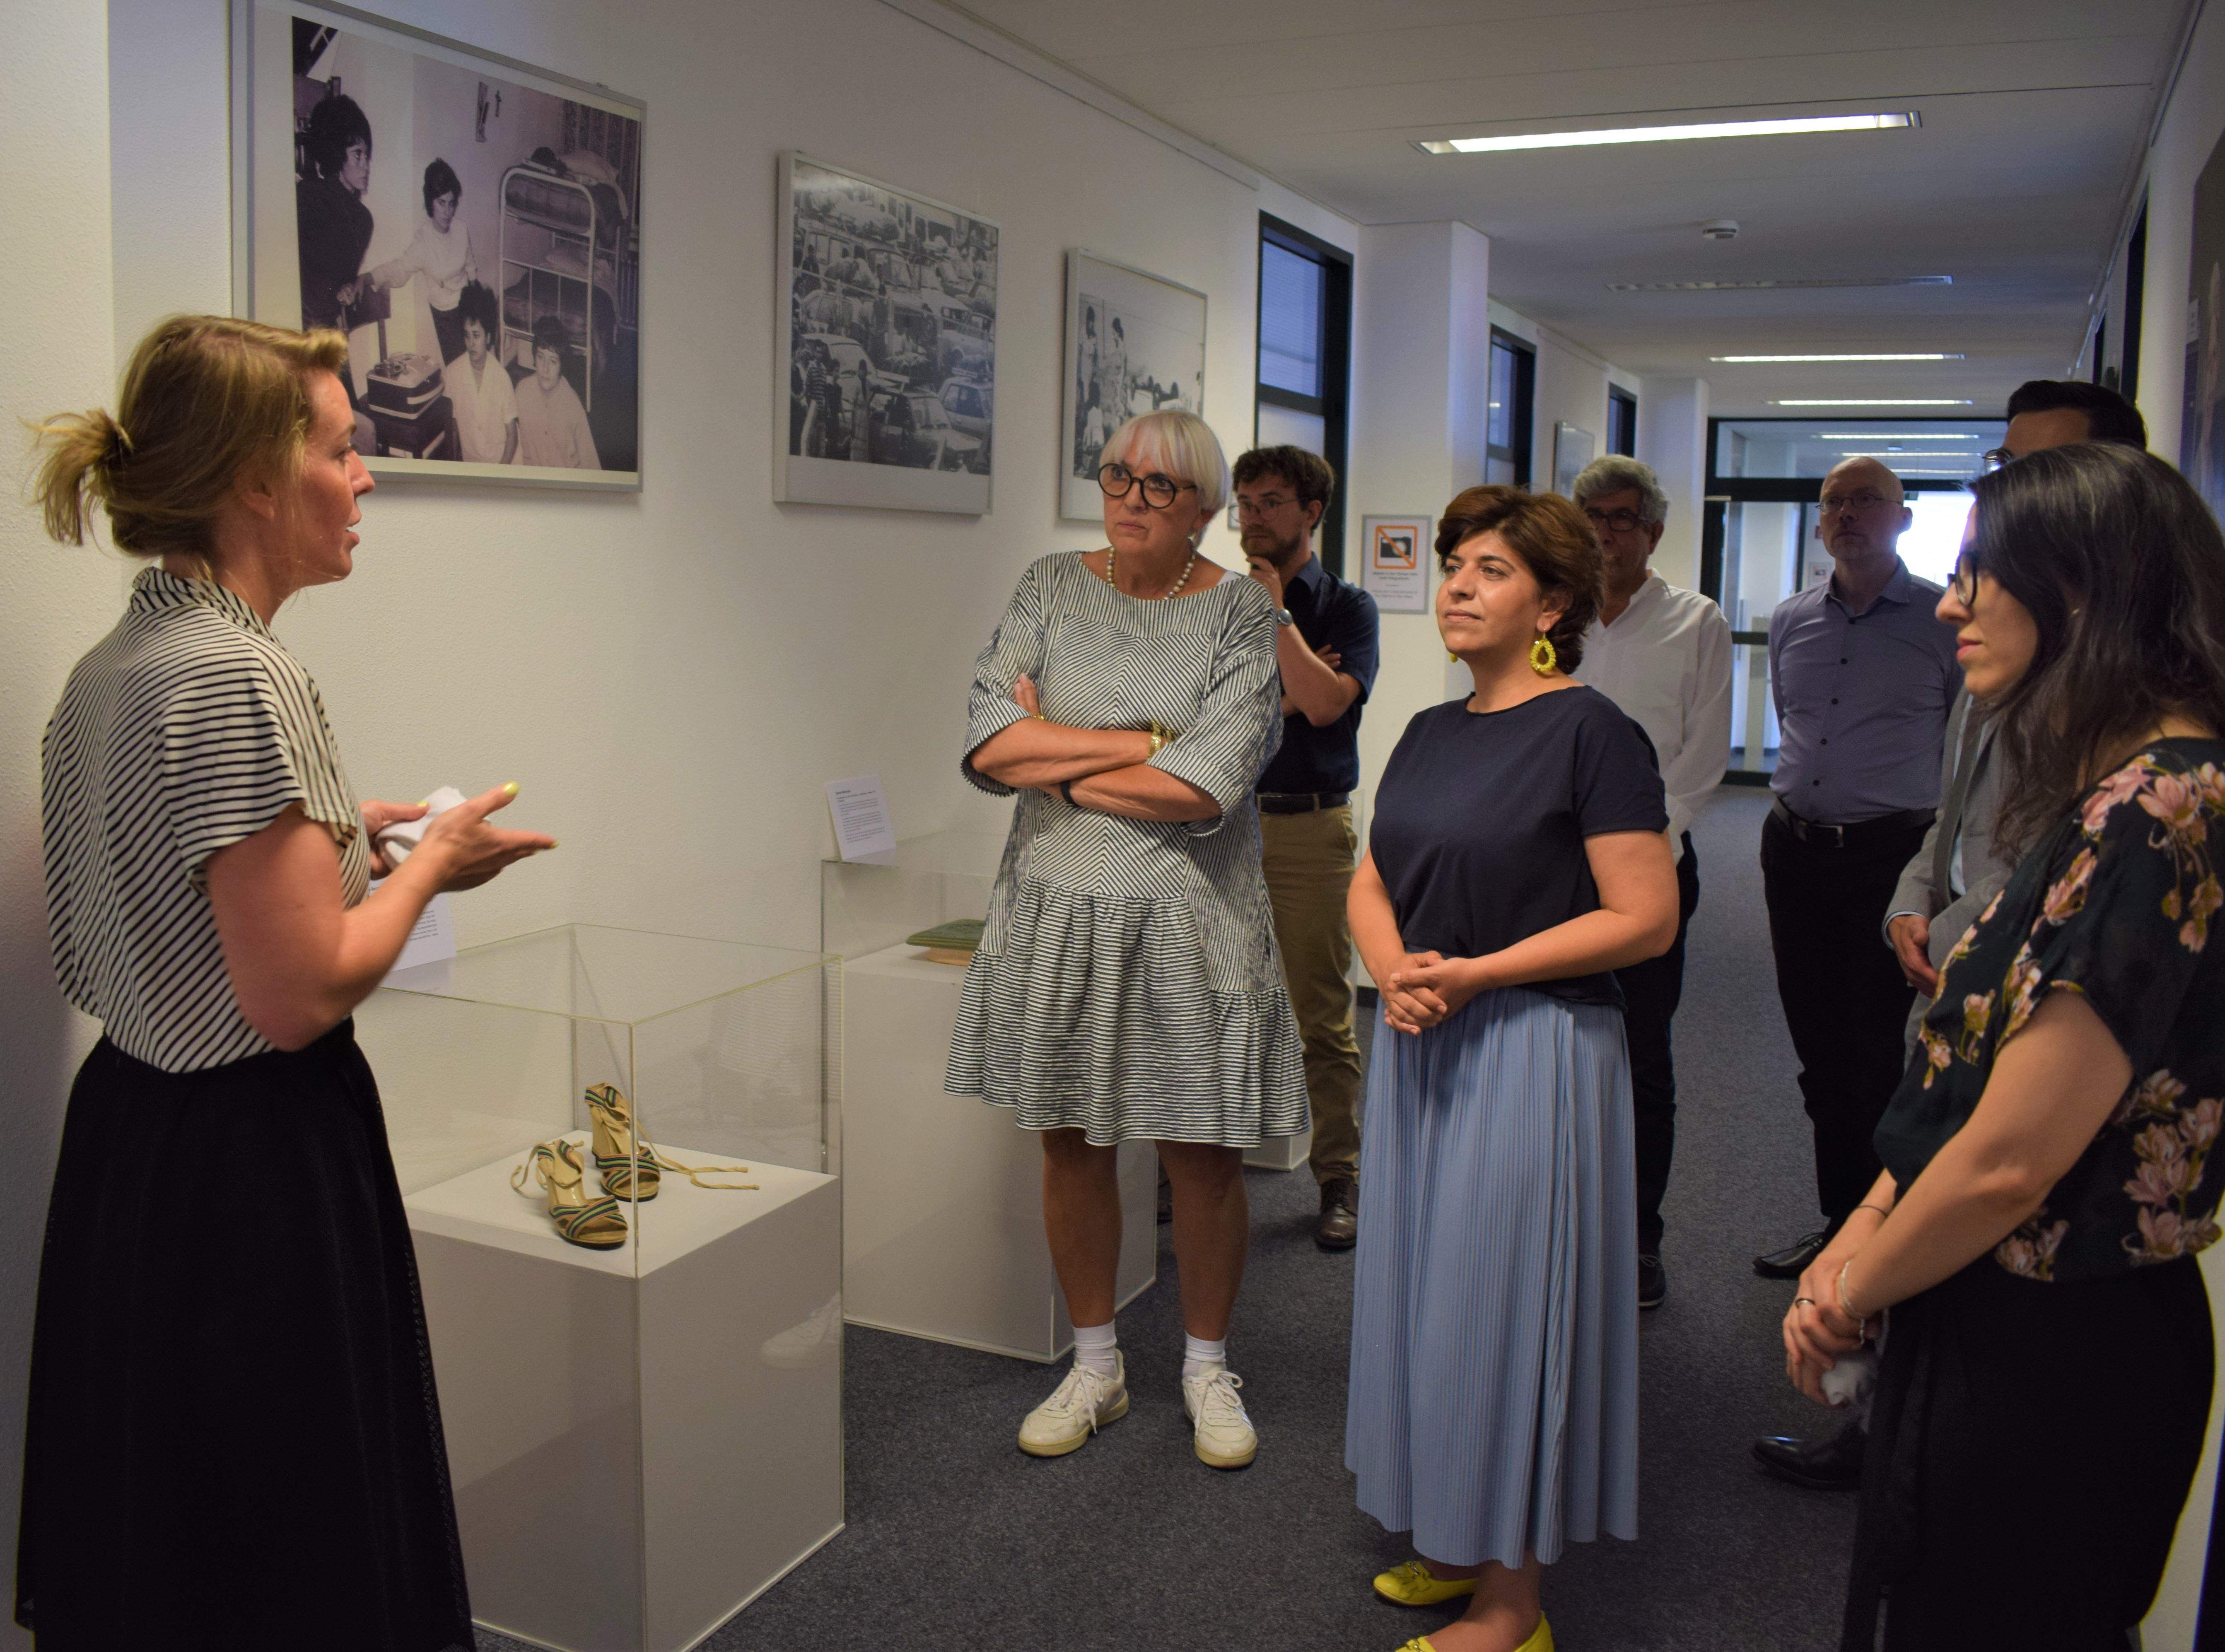 The project manager of the "House of Immigration Society", Dr. Katrin Schaumburg (in the picture on the left) together with DOMiDLabs project manager Sandra Vacca (on the right in the picture) gave insights into the DOMiD collection in a joint tour.